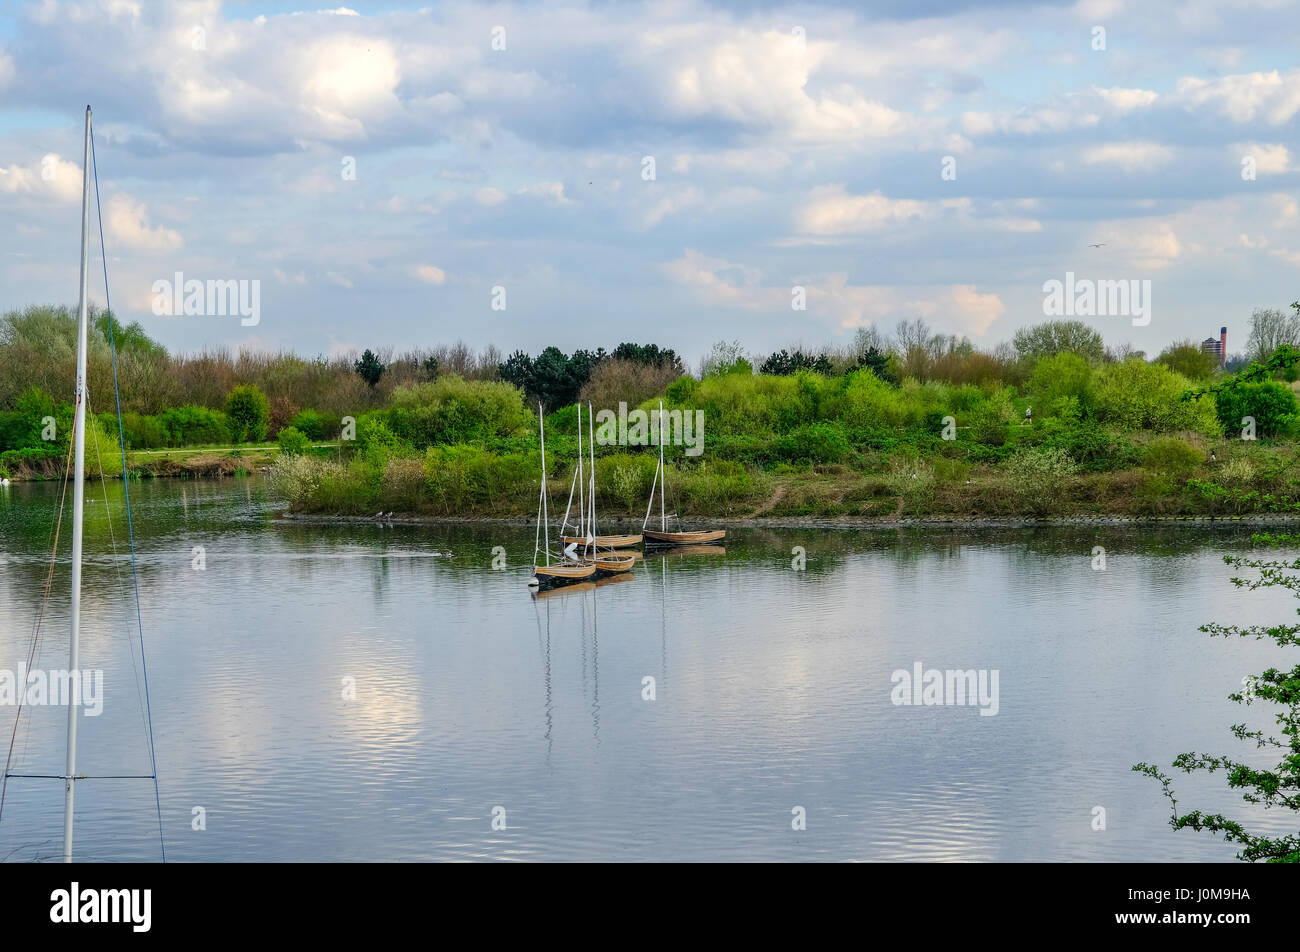 Four sailing boats moored on calm lake.  Shot taken at Fairlop Waters, Essex in springtime. Stock Photo